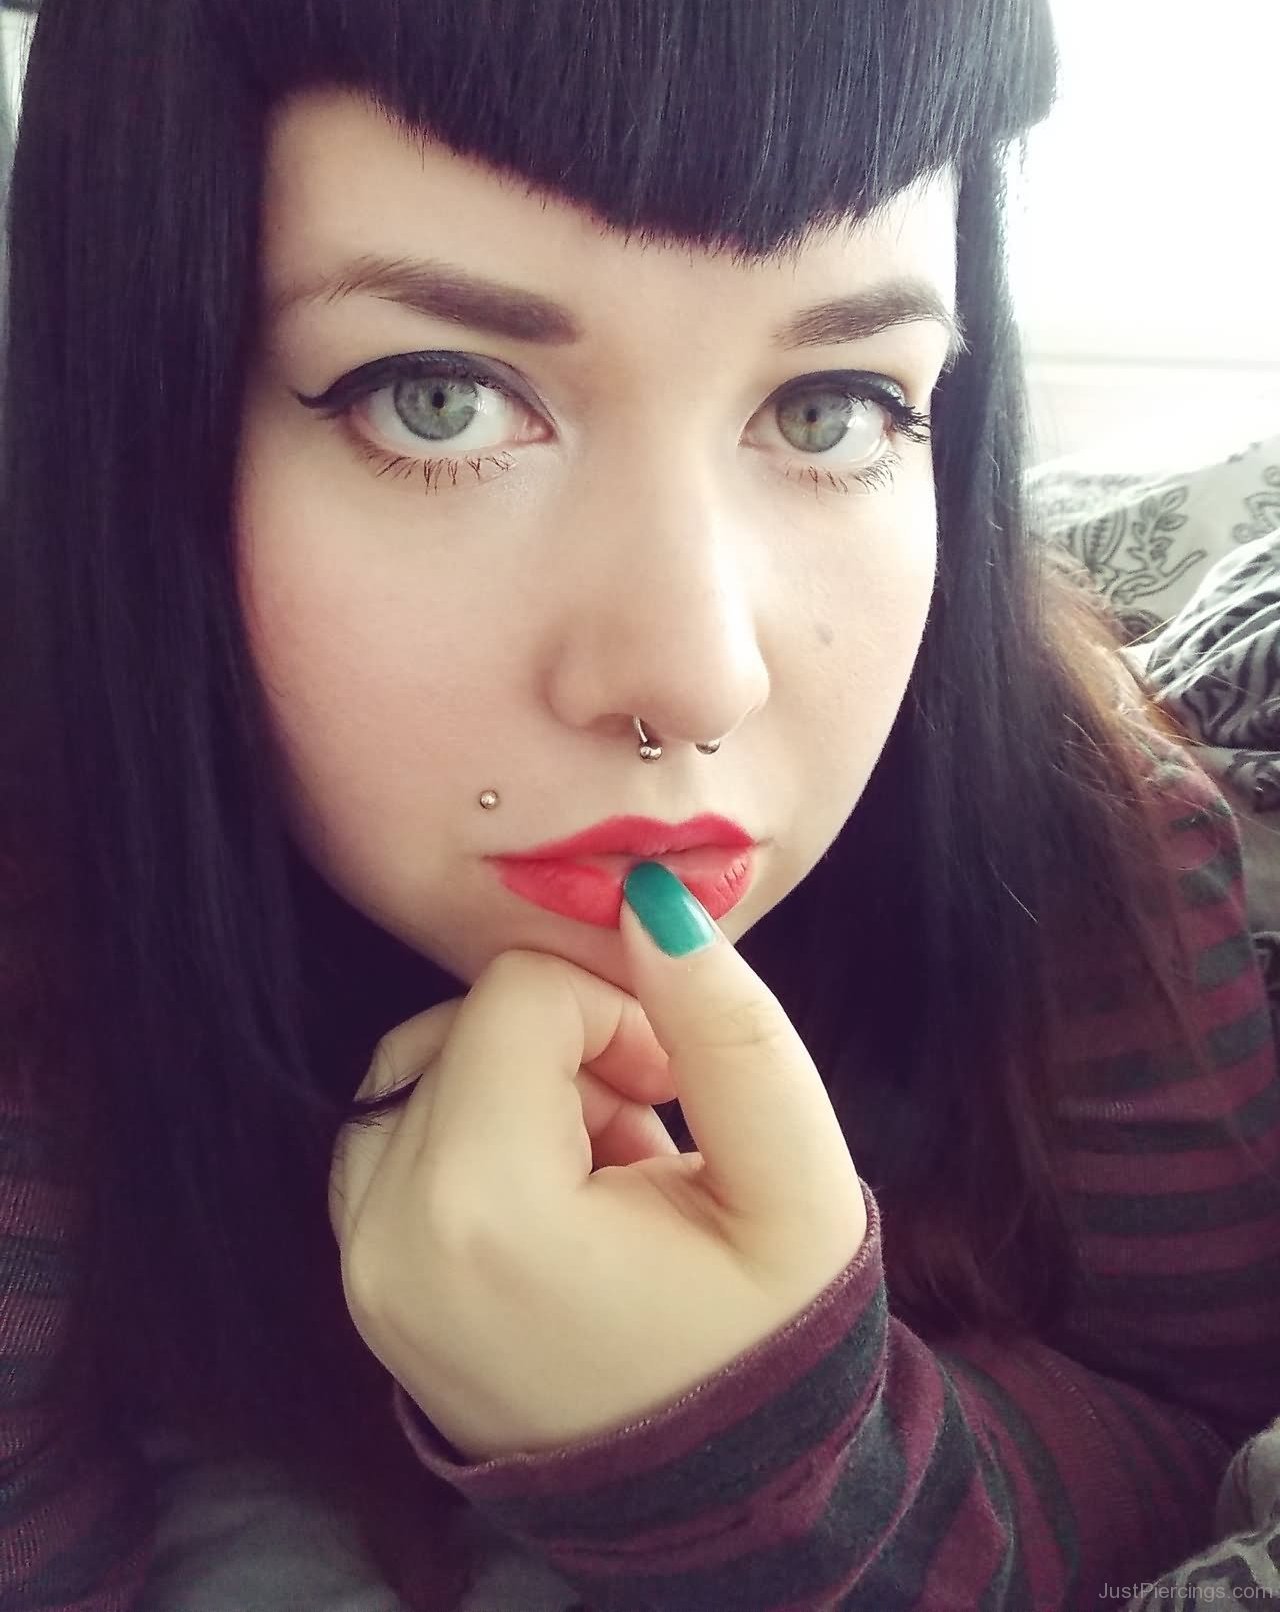 Girl With Septum And Madonna Piercing